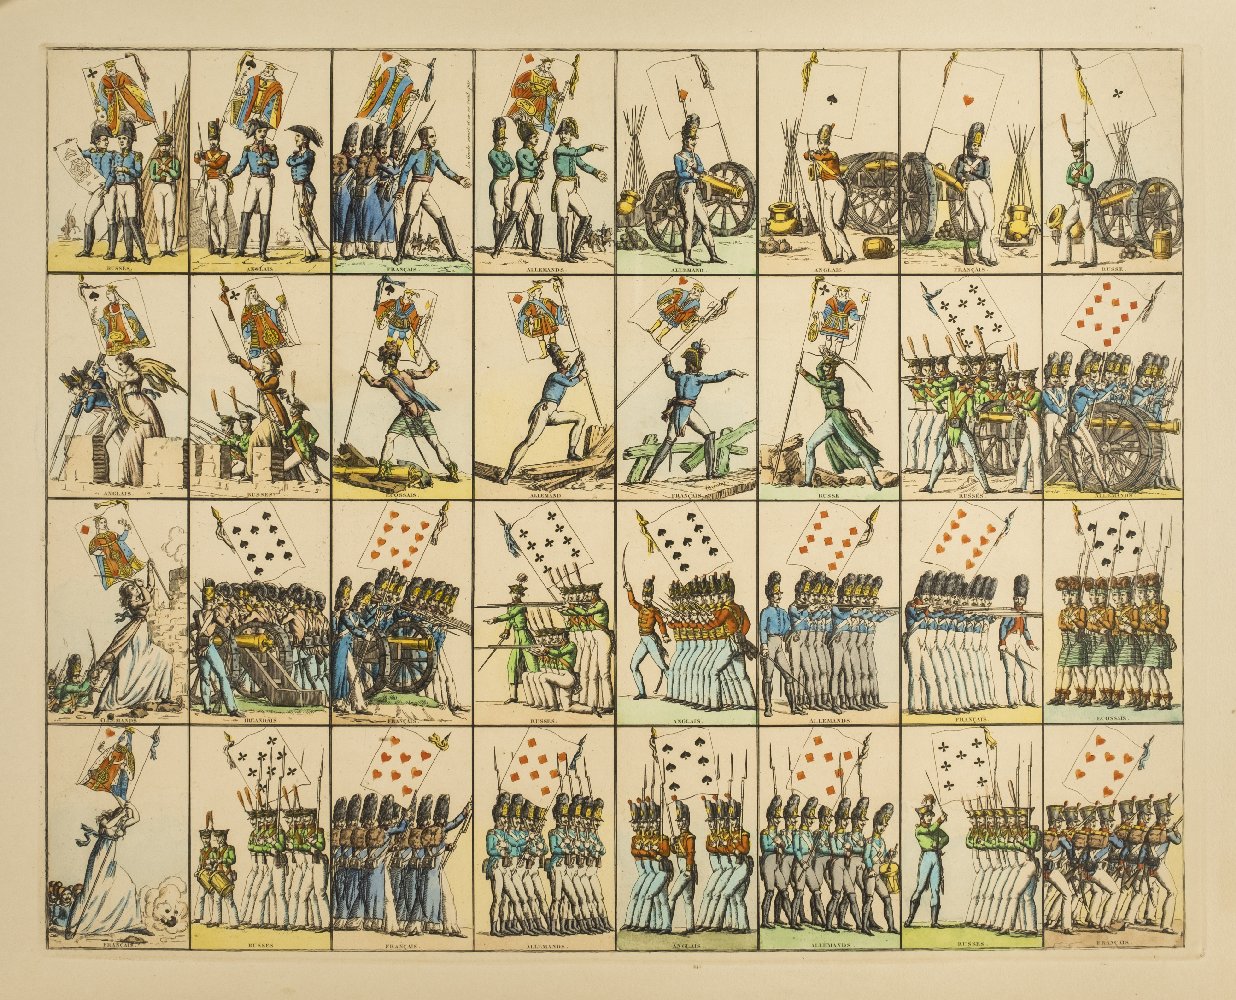 *Playing cards. Jeu de Drapeaux, France, circa 1816, a complete uncut sheet of thirty-two hand-